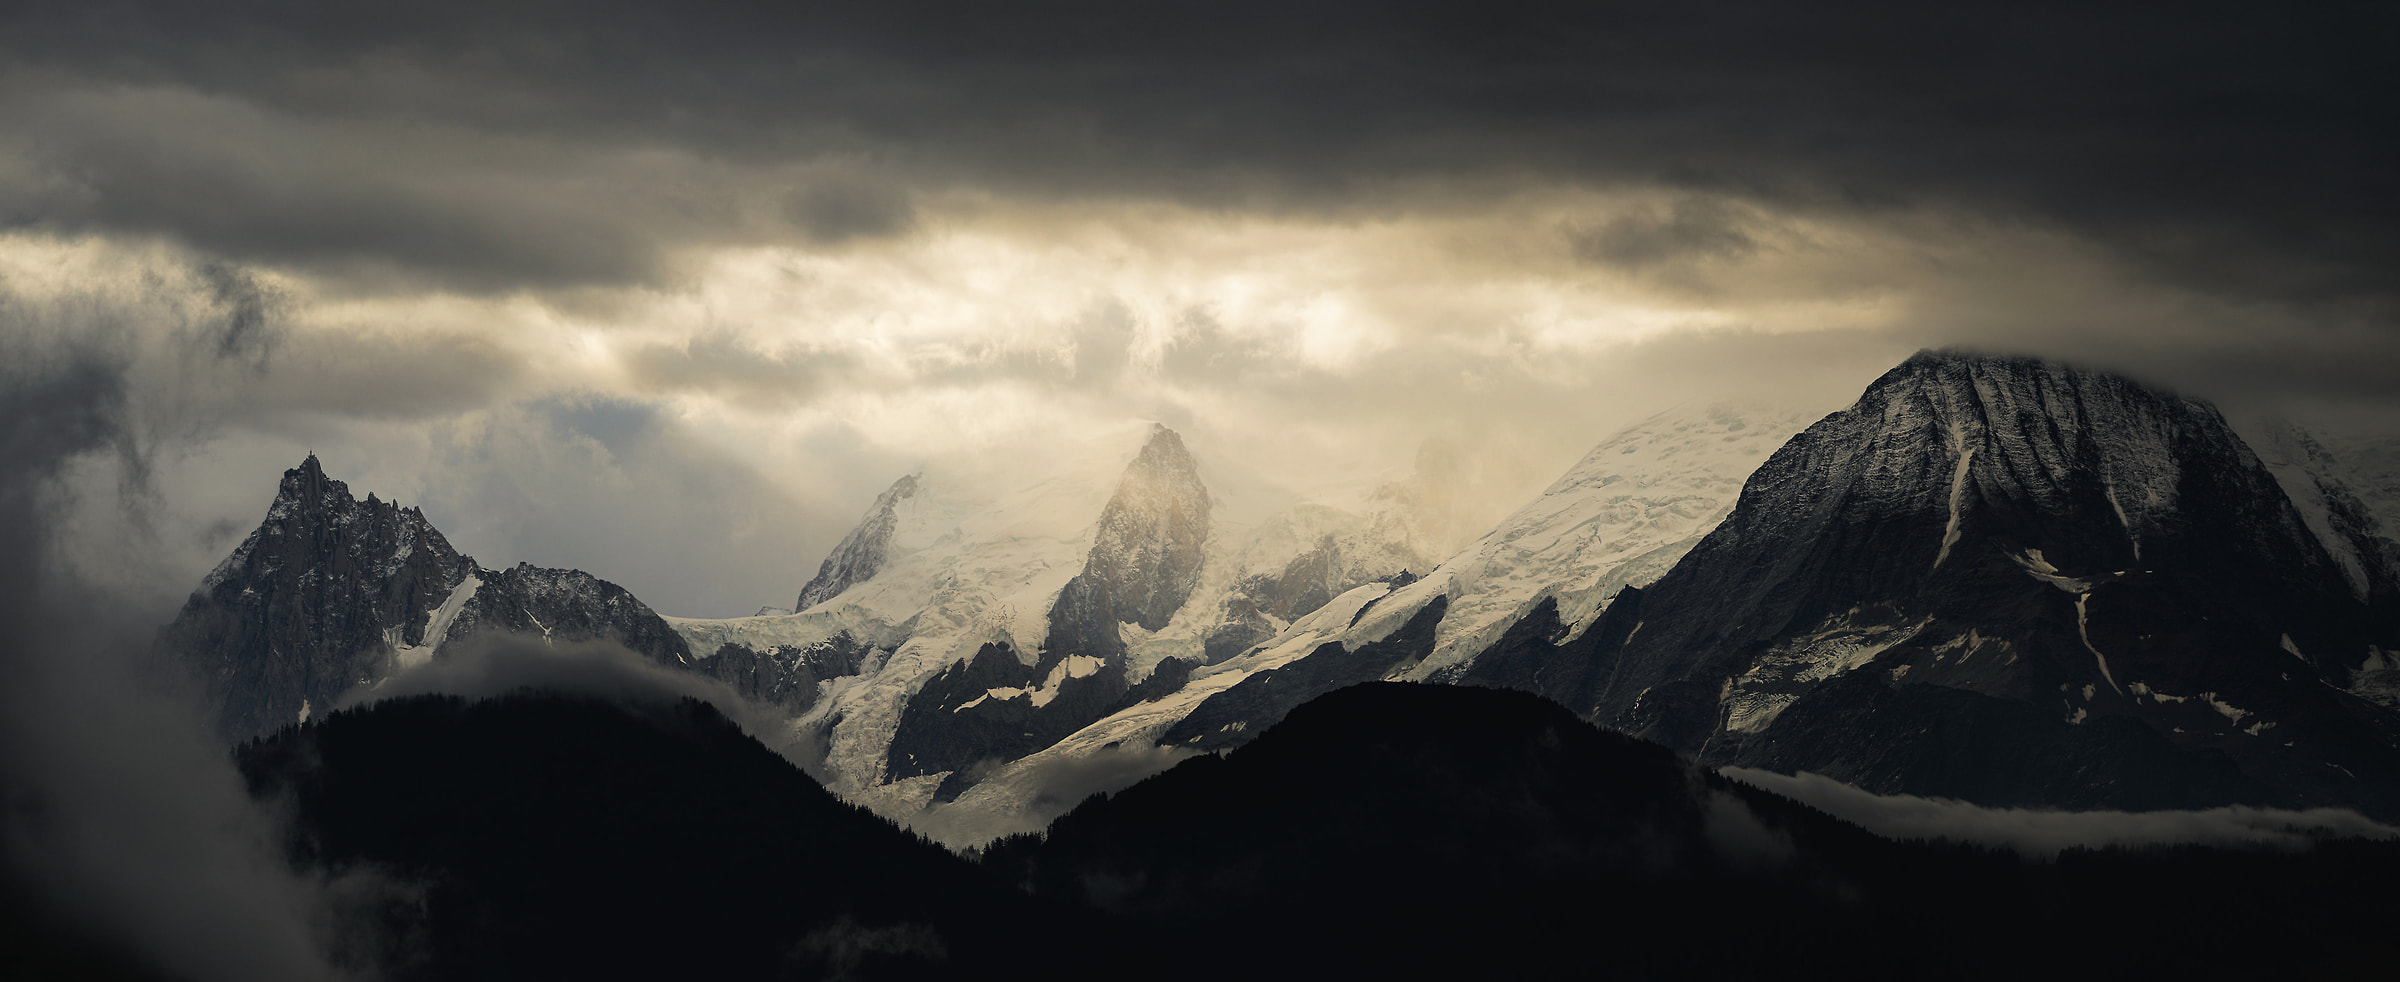 166 megapixels! A very high resolution, large-format VAST photo print of a mountain scene with a moody atmosphere; landscape photograph created by Alexandre Deschaumes.